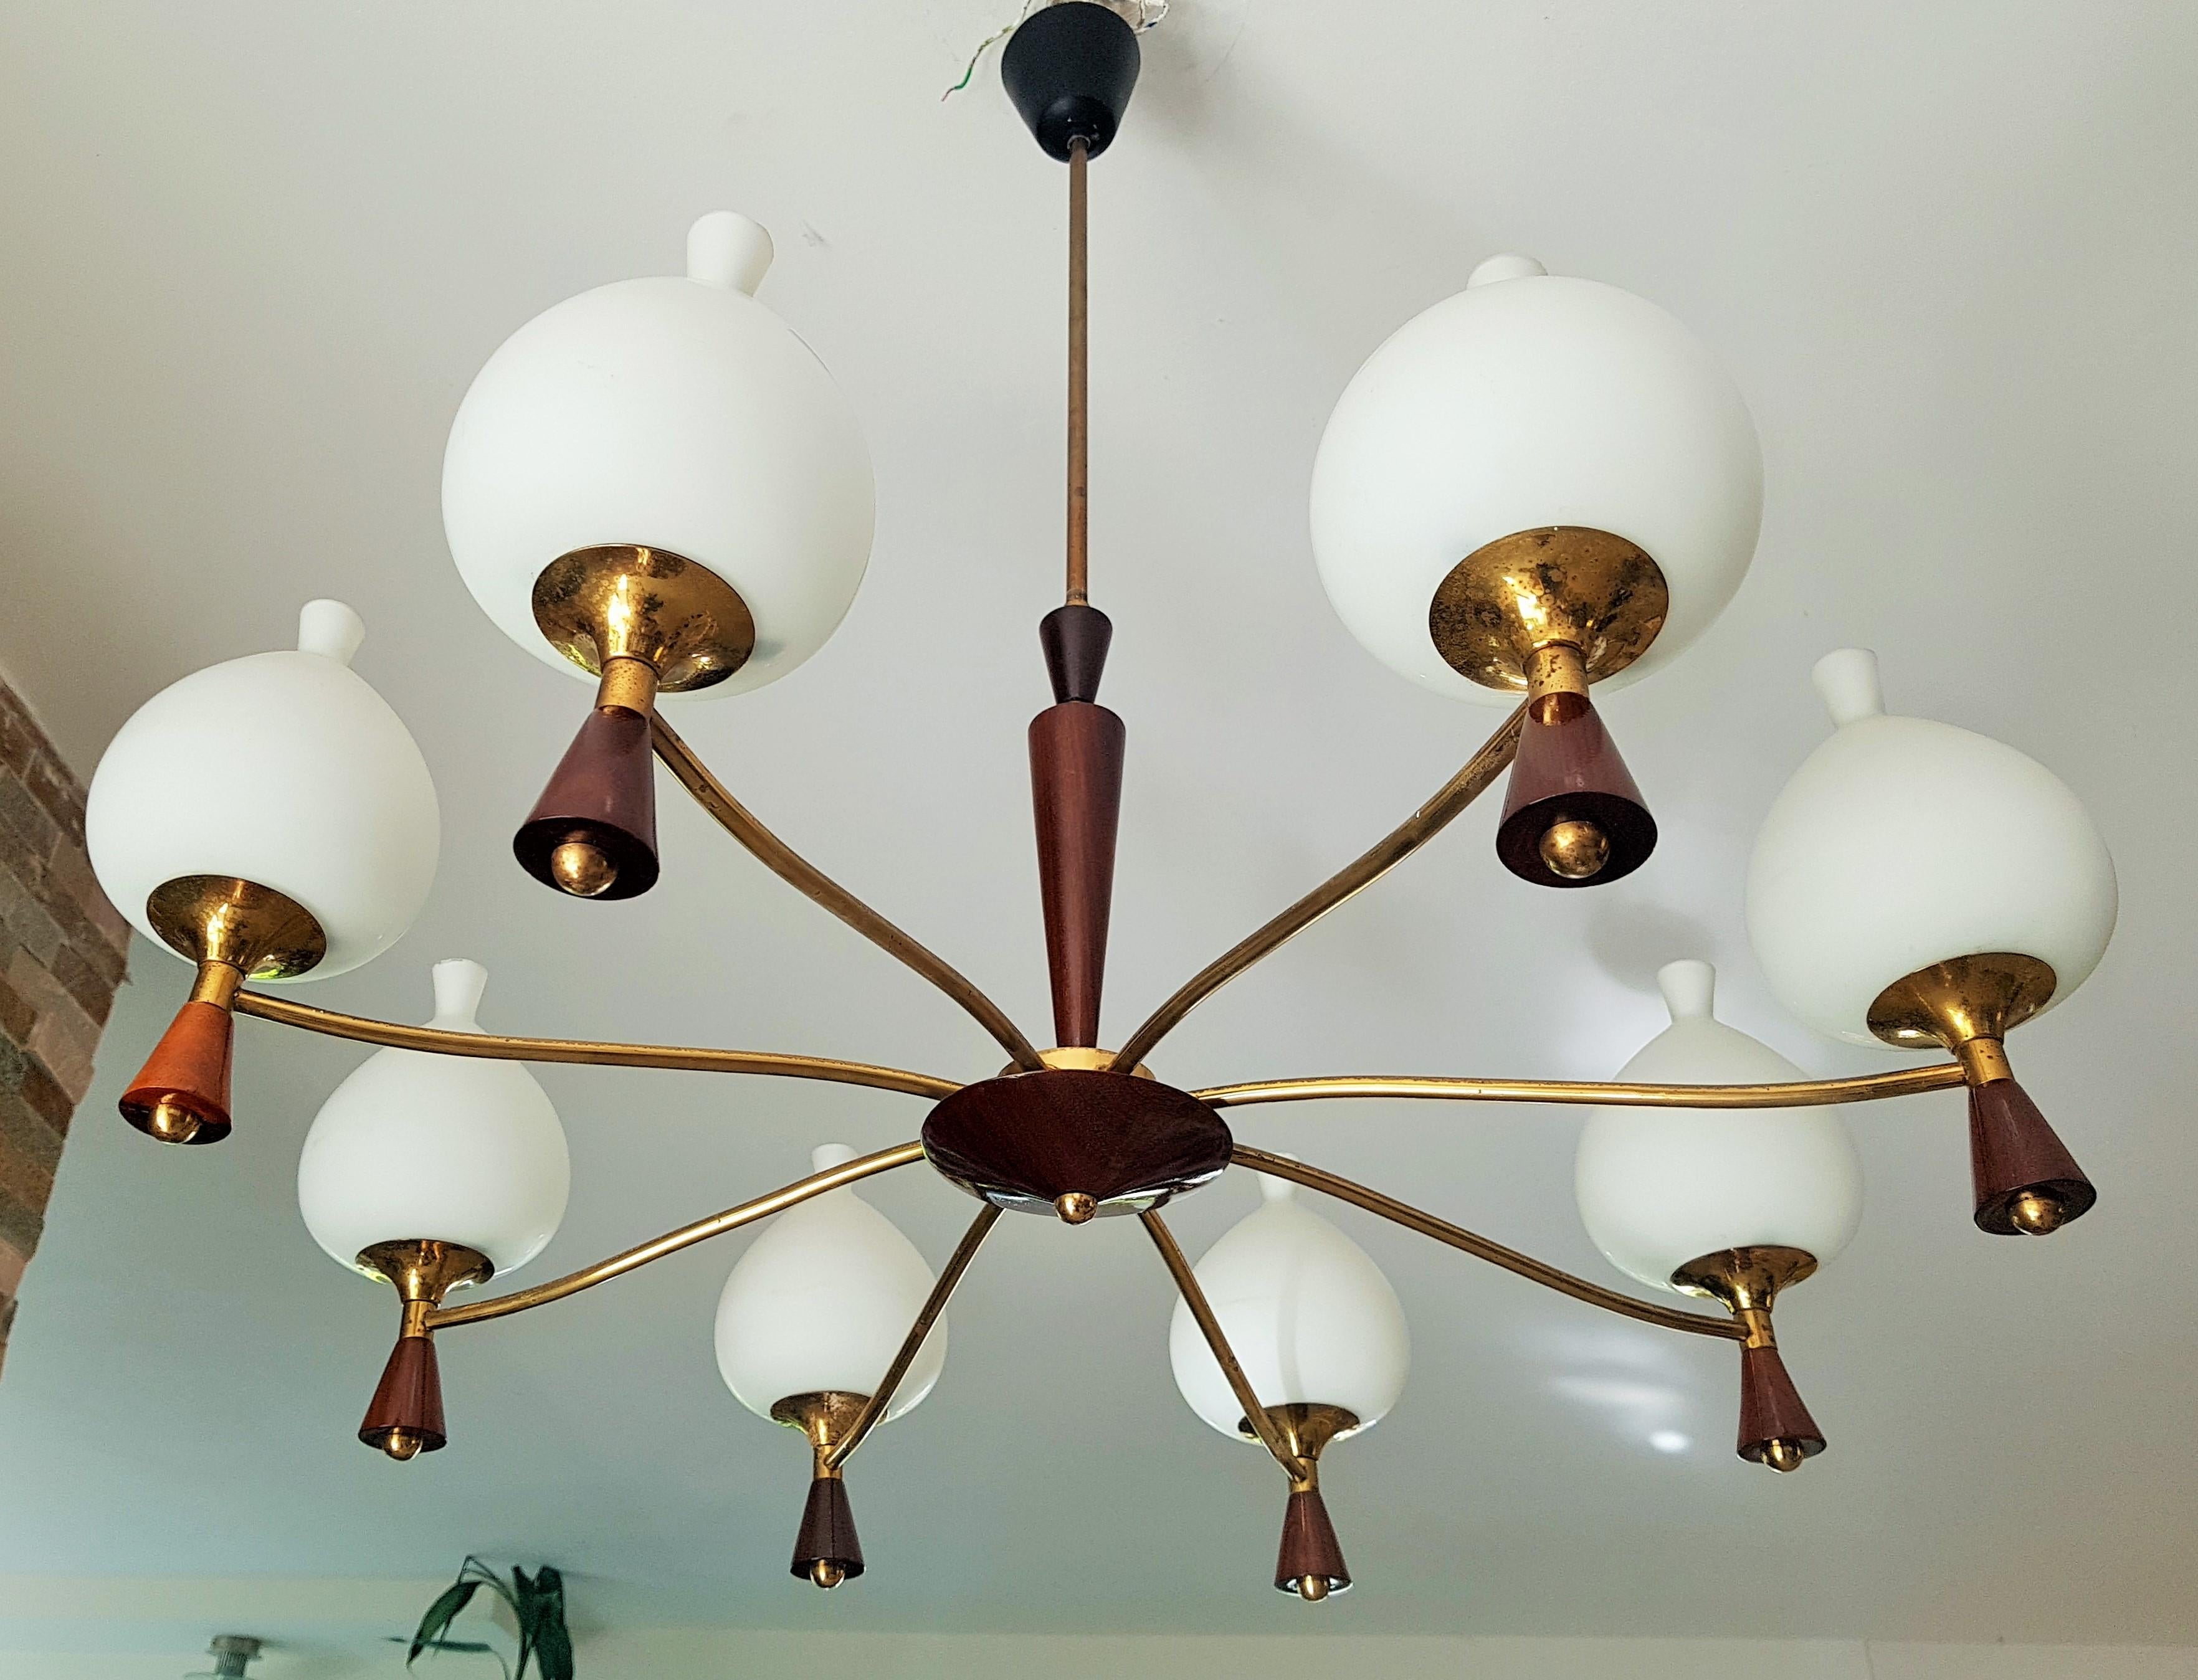 Midcentury Chandelier Style Sciolari, Brass and Wood, Italy, 1950s For Sale 8